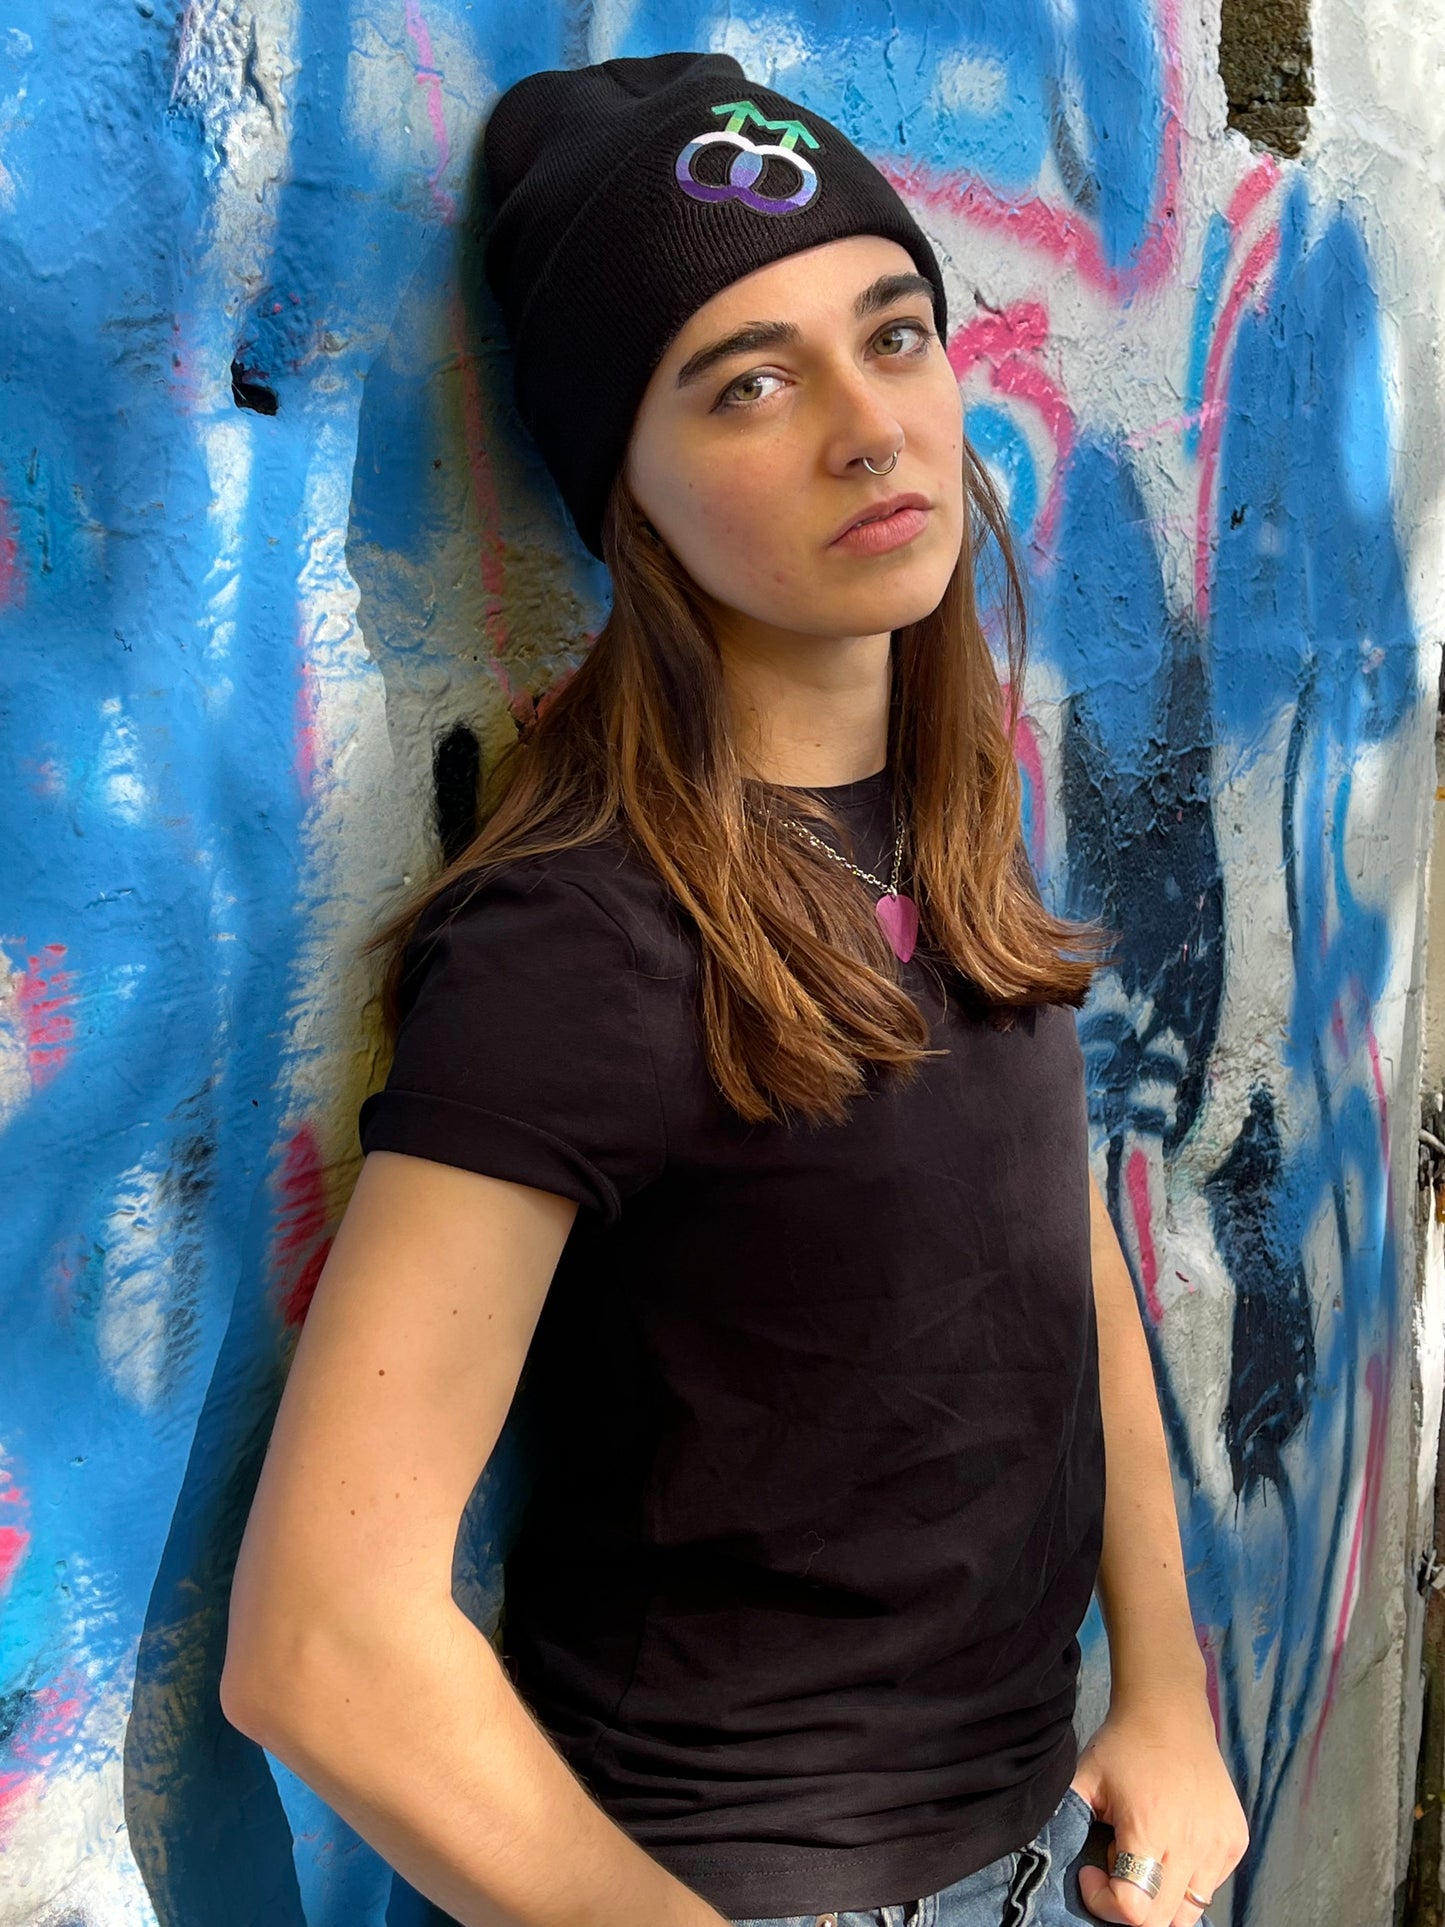 waist up shot of person leaning against graffitied wall wearing the gay mlm beanie